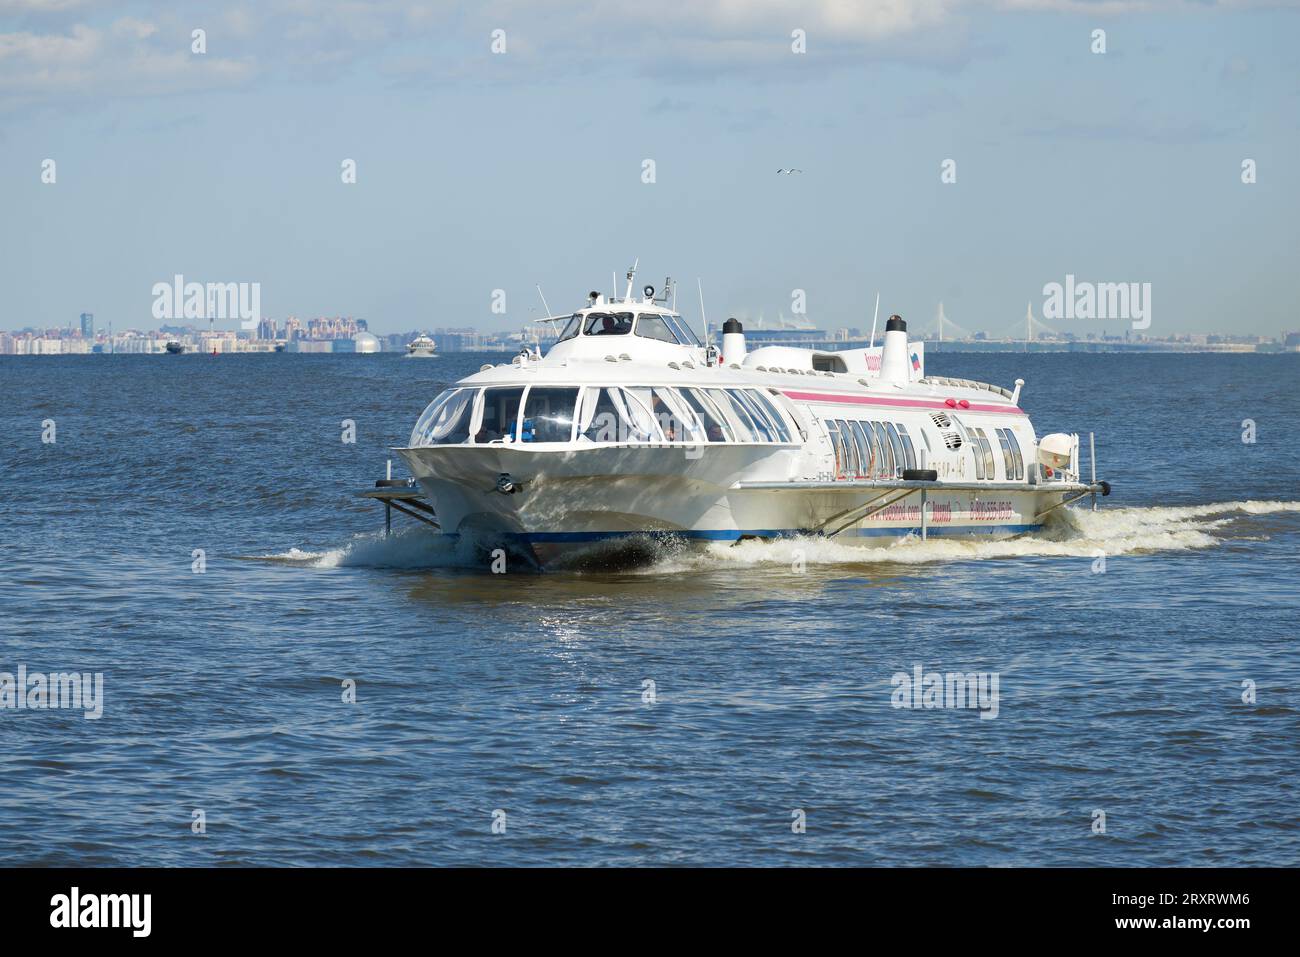 ST PETERSBURG, RUSSIA - MAY 30, 2017: Meteor - hydrofoil ship close-up in the water area of the Gulf of Finland Stock Photo